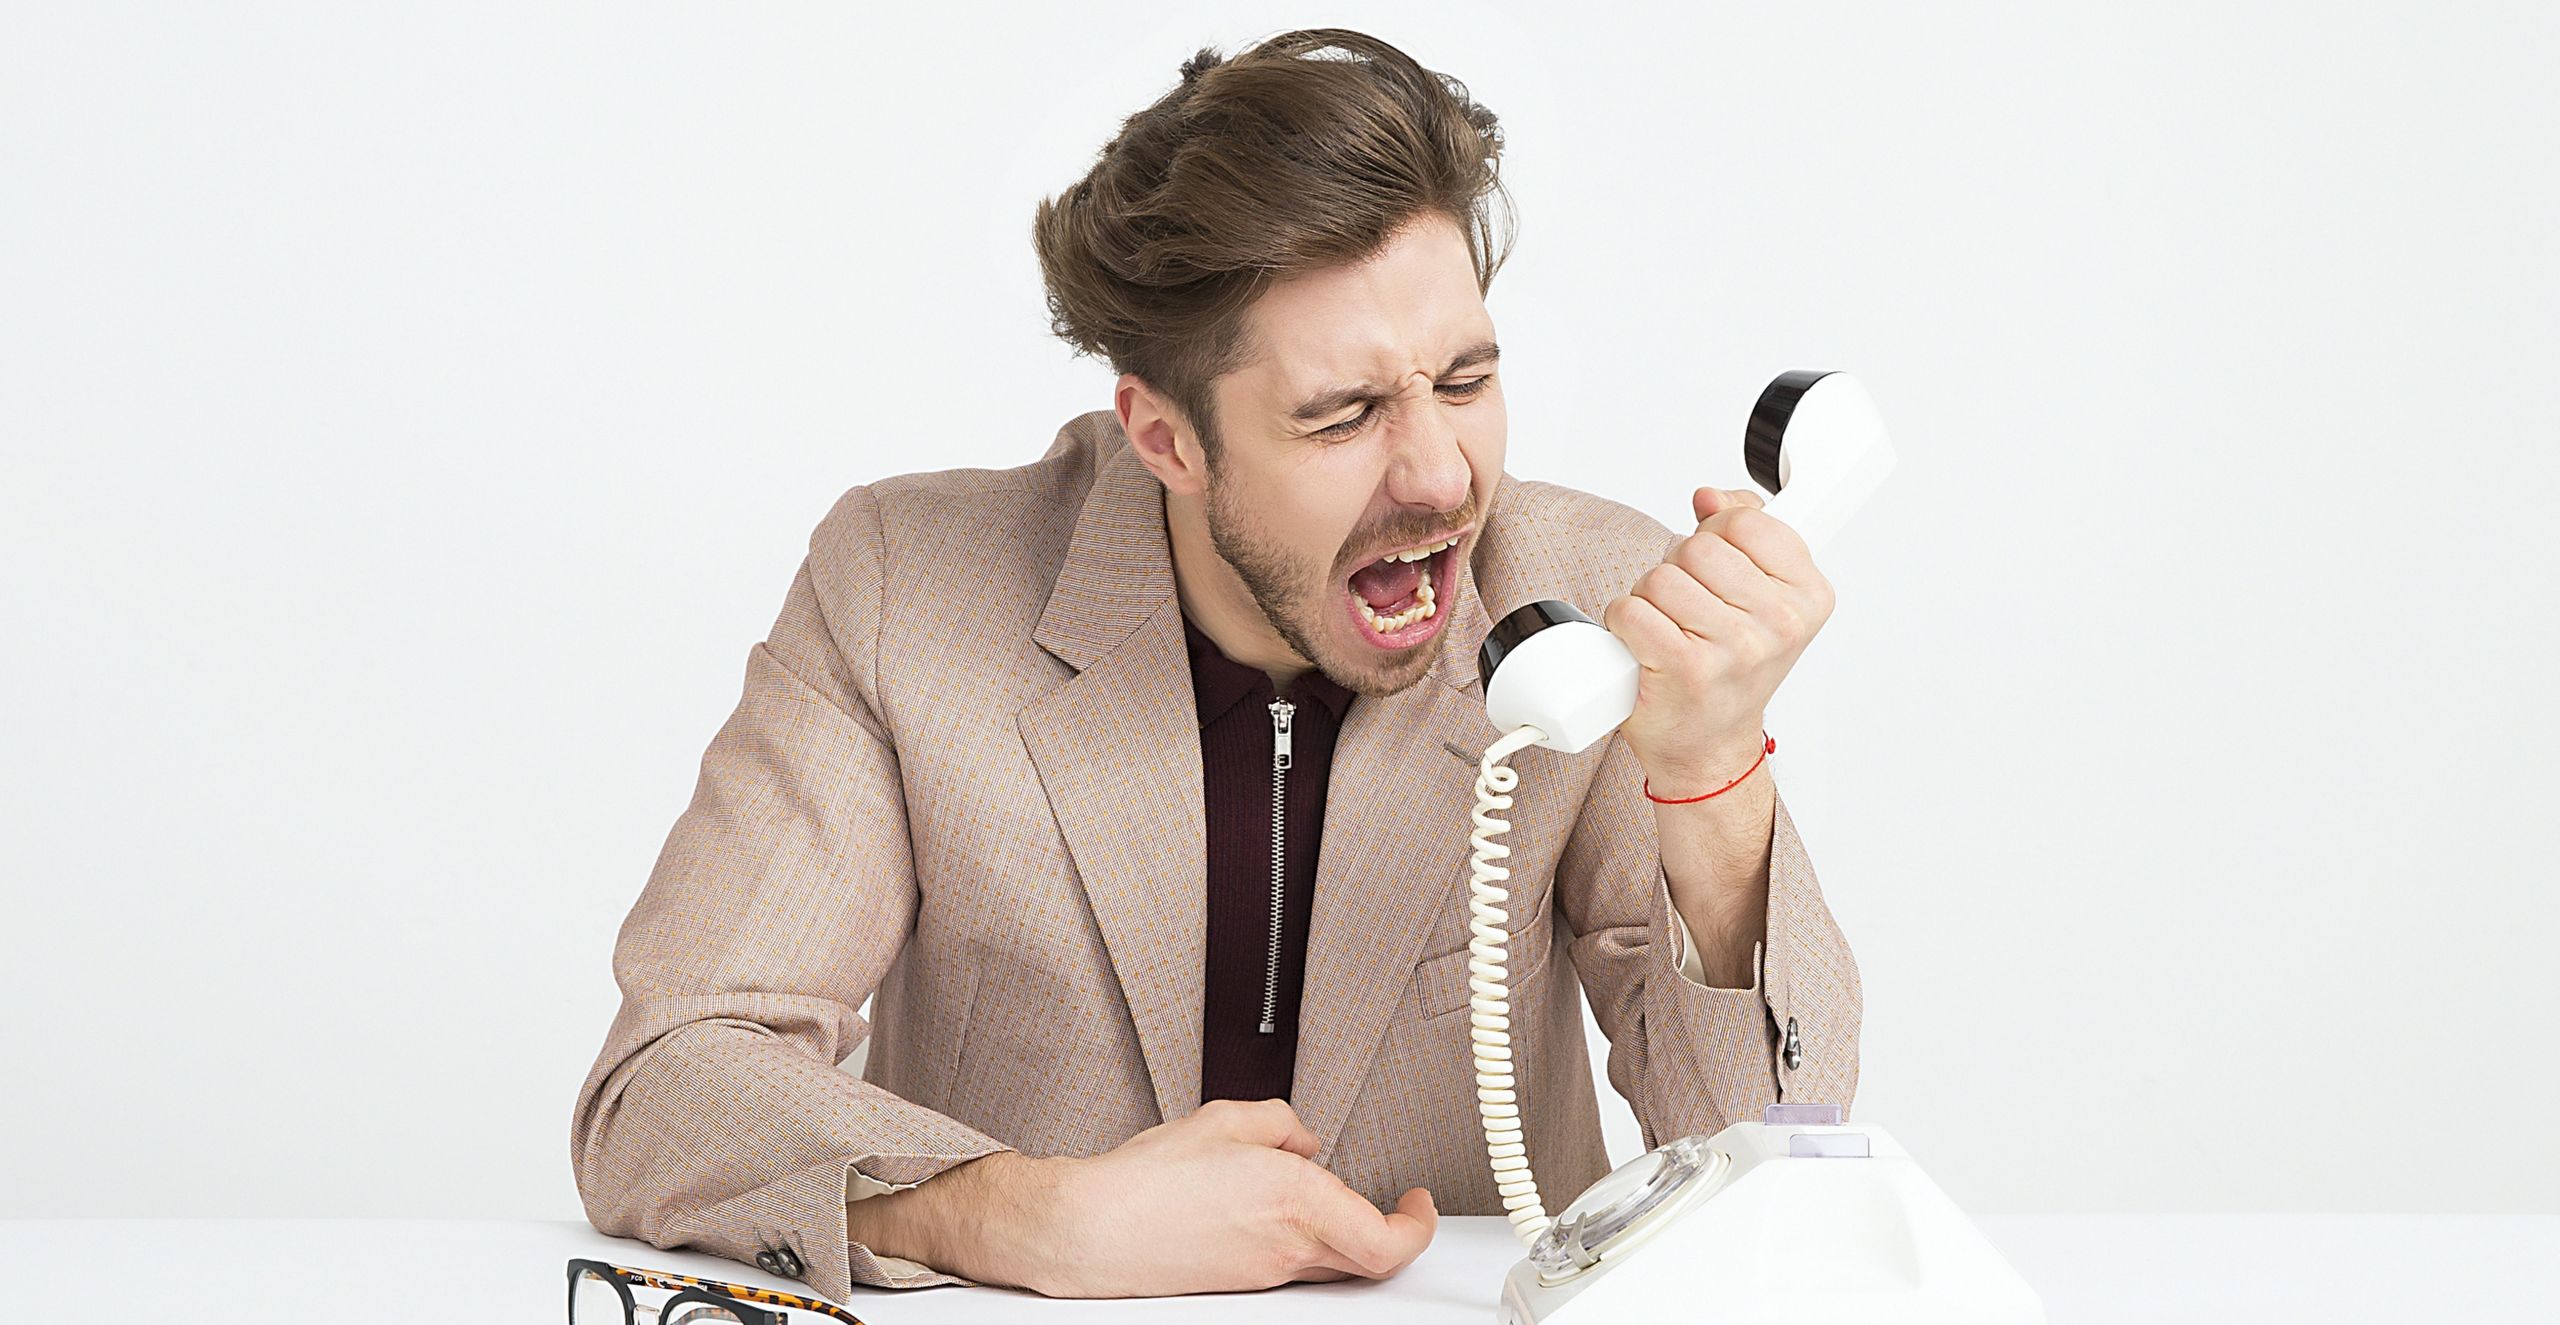 electricity providers customer service man yelling into phone